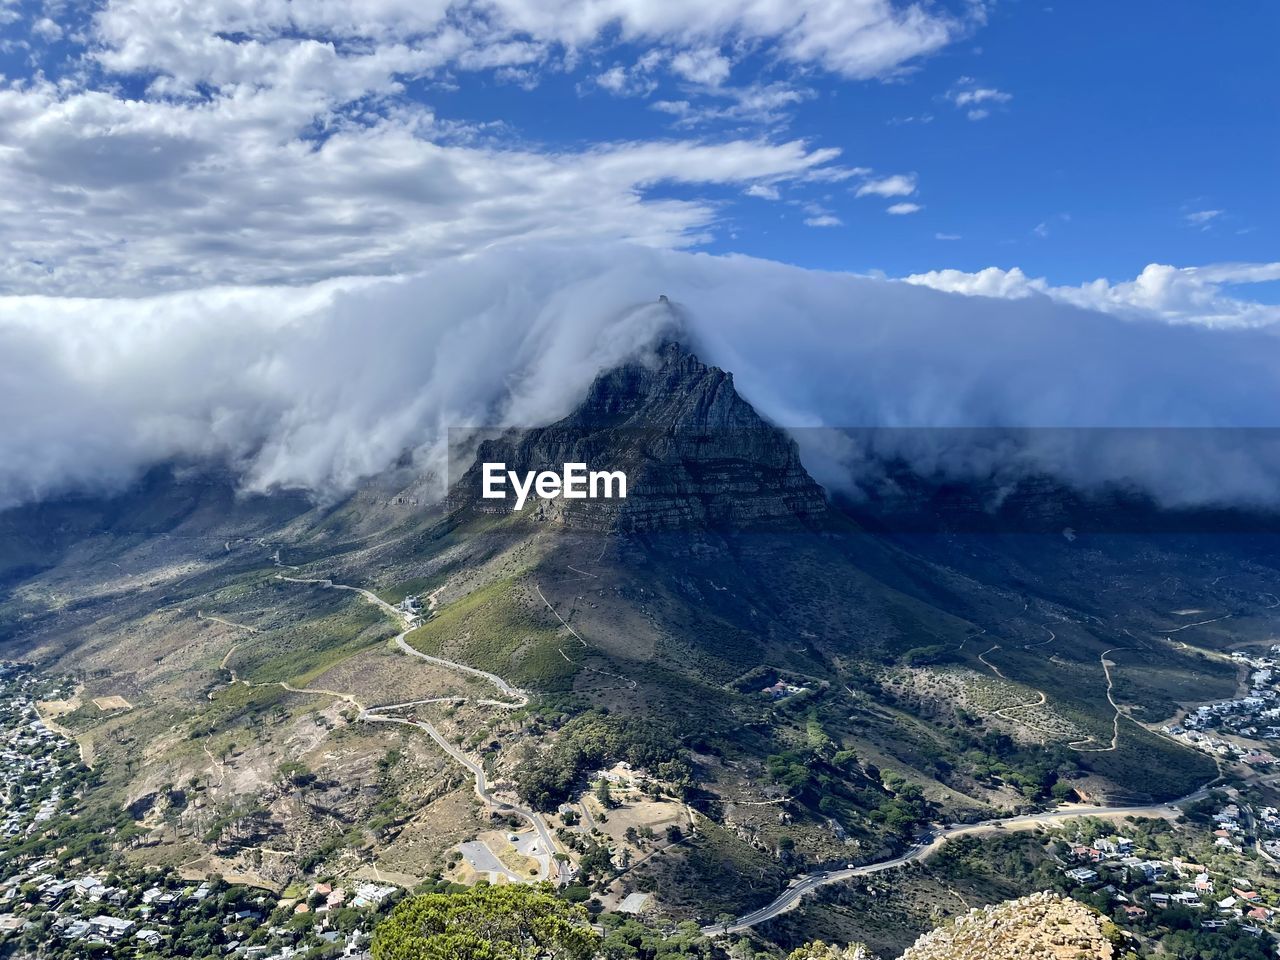 Table mountain under tablecloth clouds as seen from lionshead in cape town, south africa